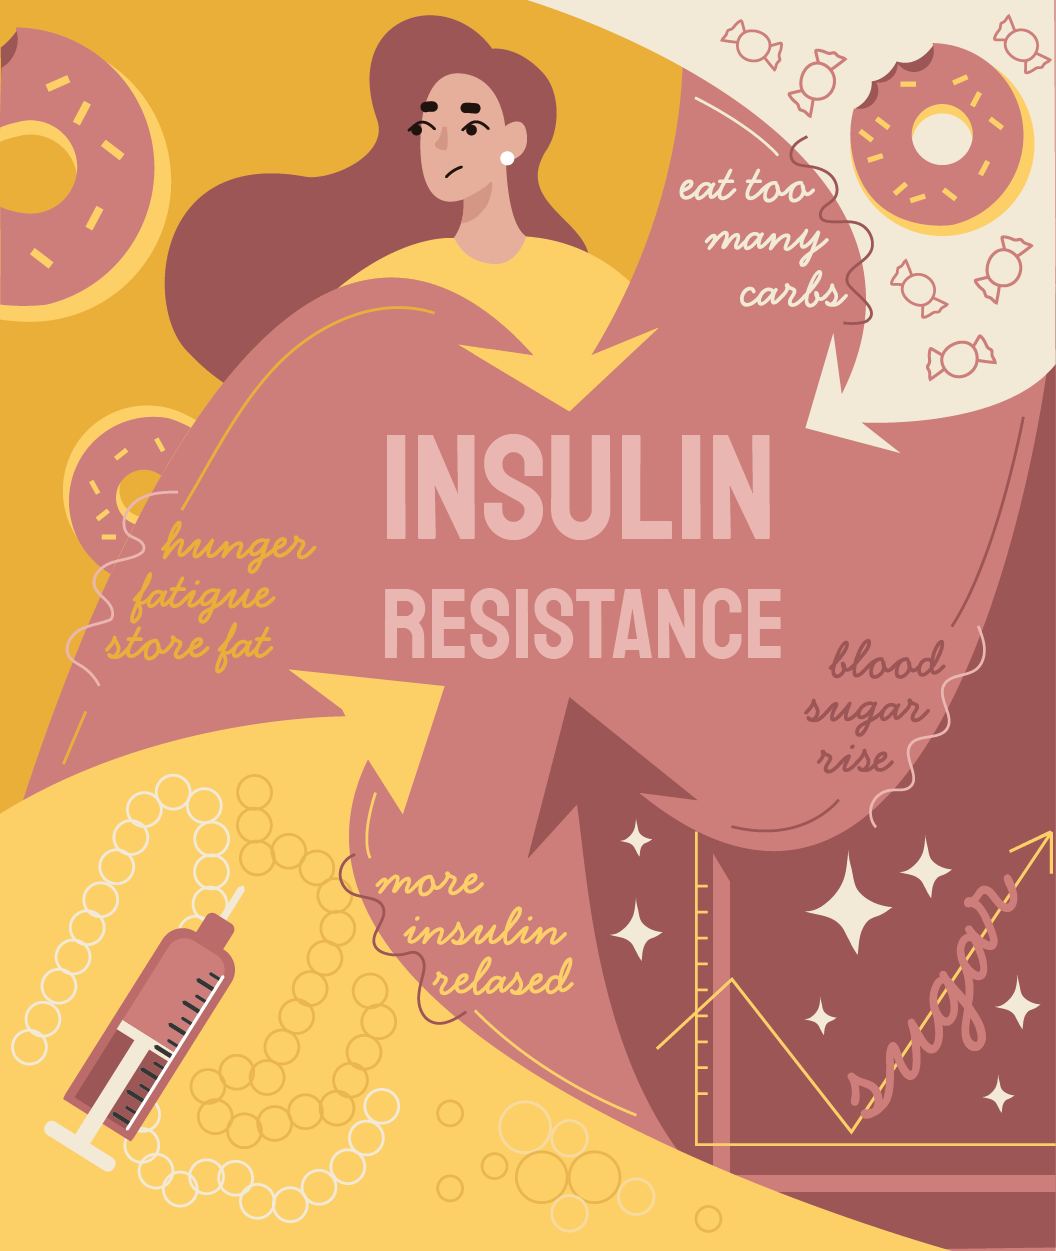 fasting insulin resistance